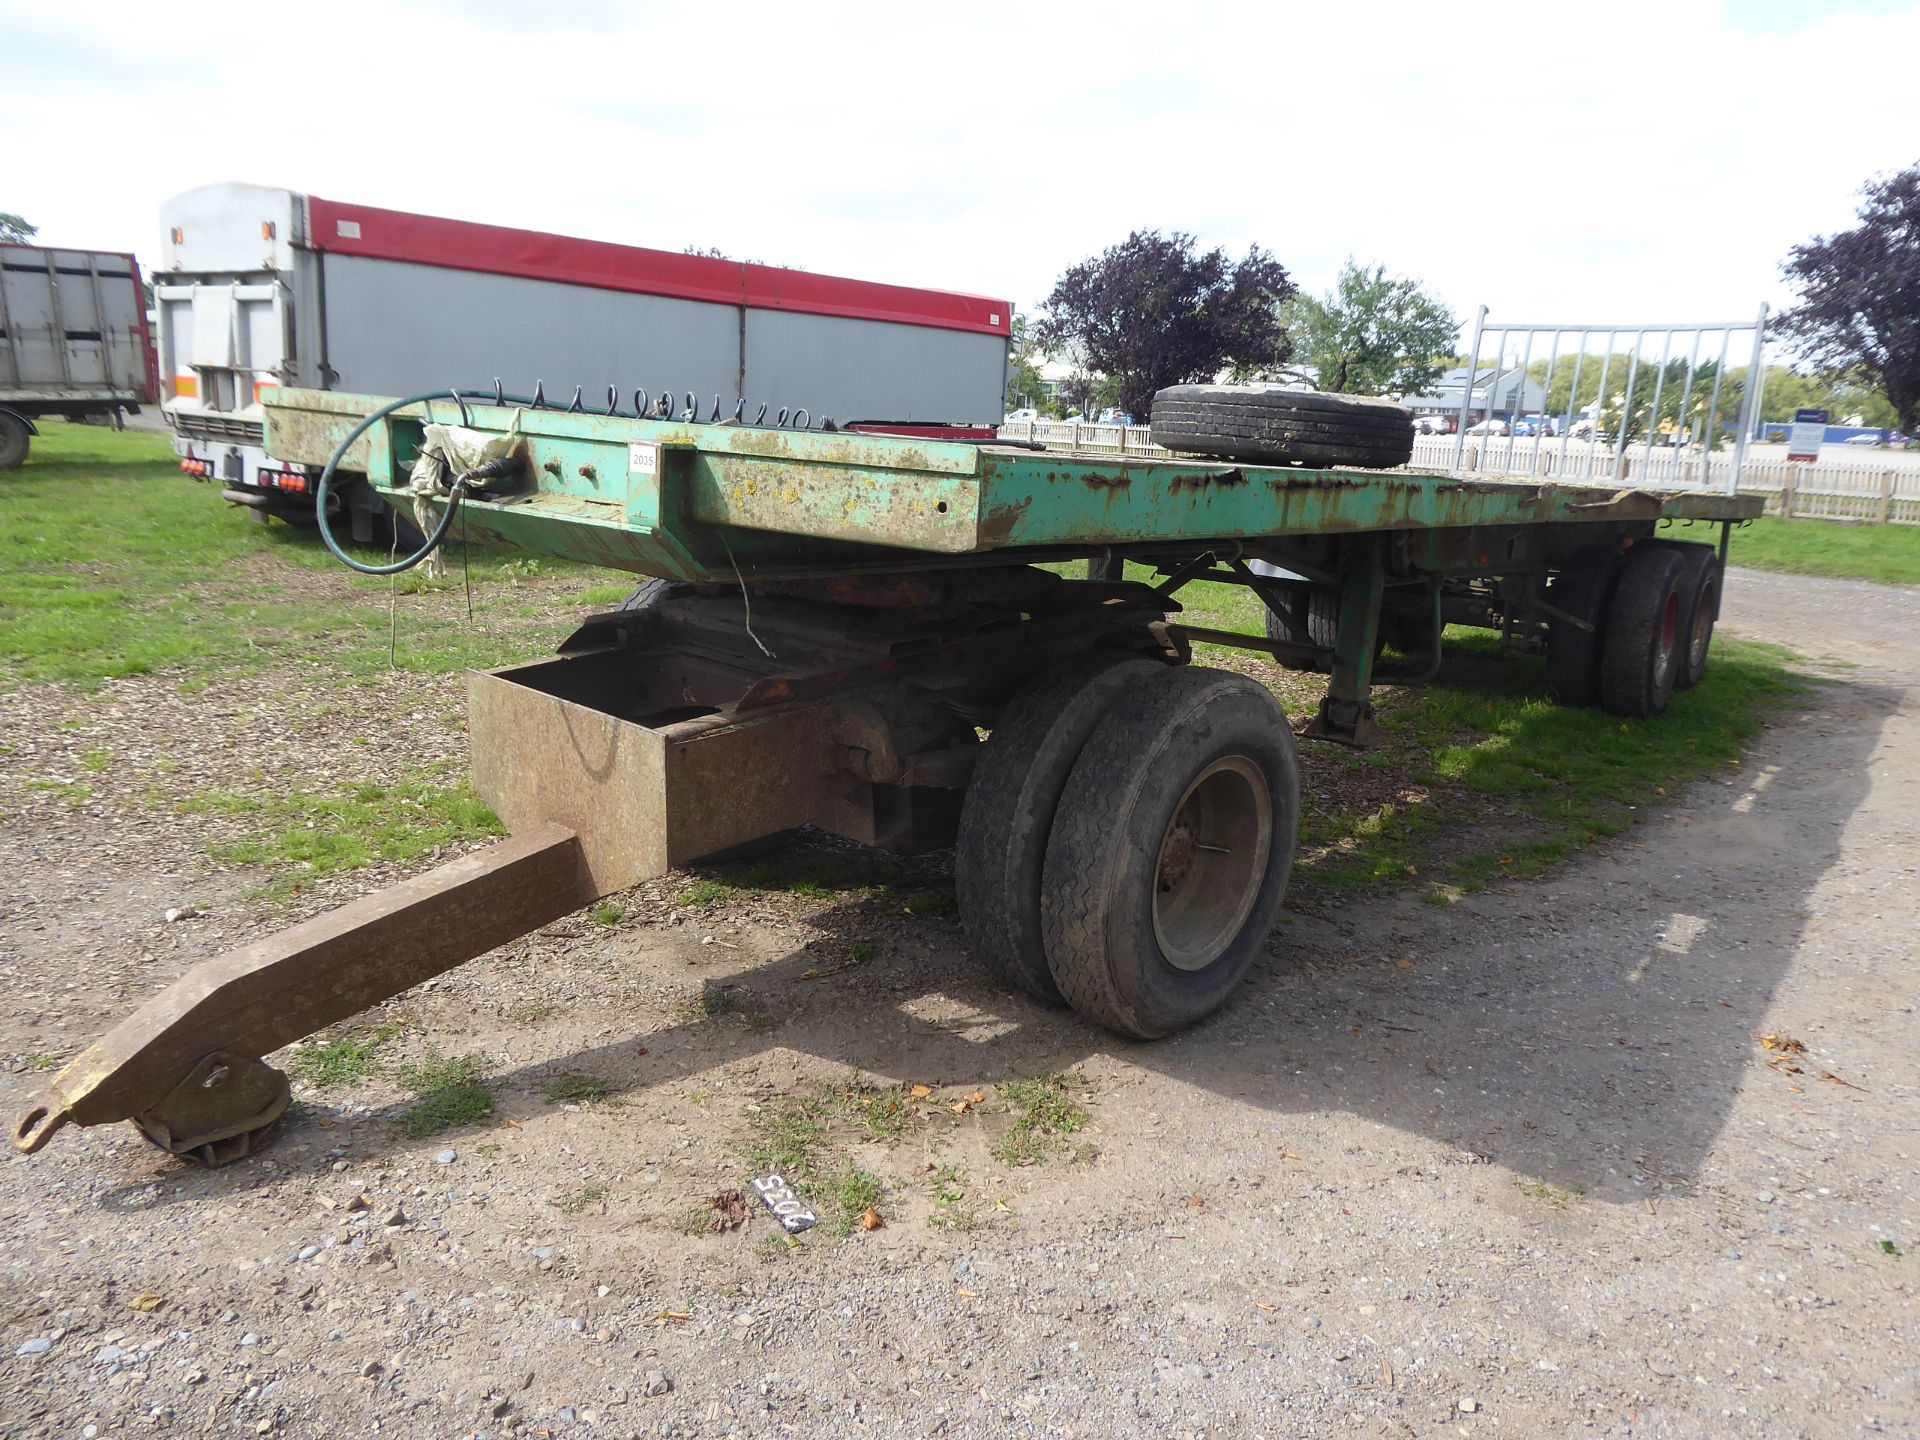 33ft artic trailer, working lights and brakes